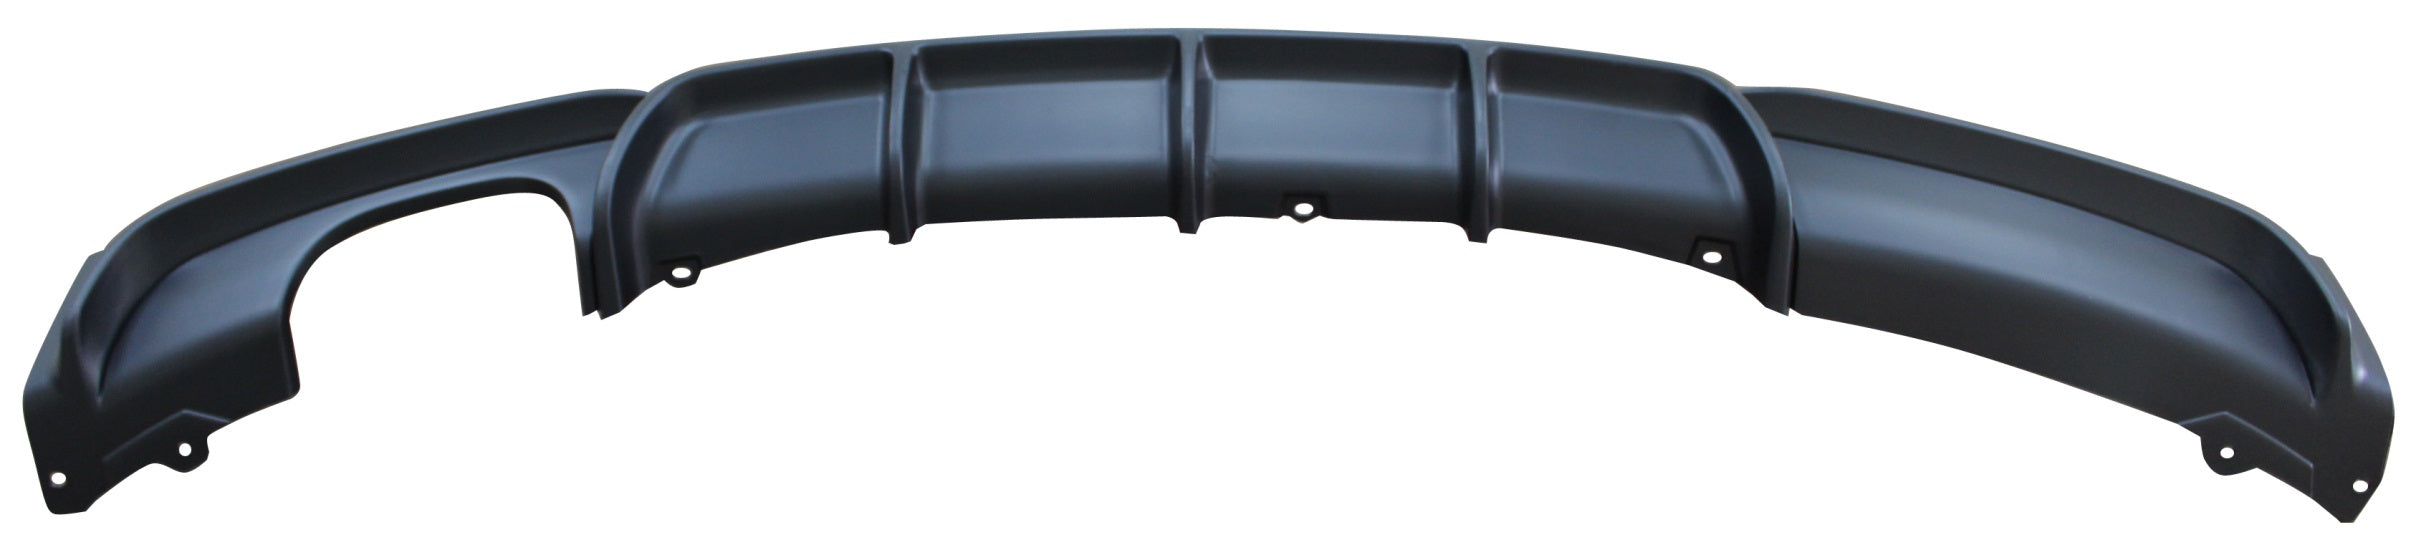 Zero Offset  M Performance Style Rear Diffuser for BMW 3 Series (F30) 12-18 - MODE Auto Concepts